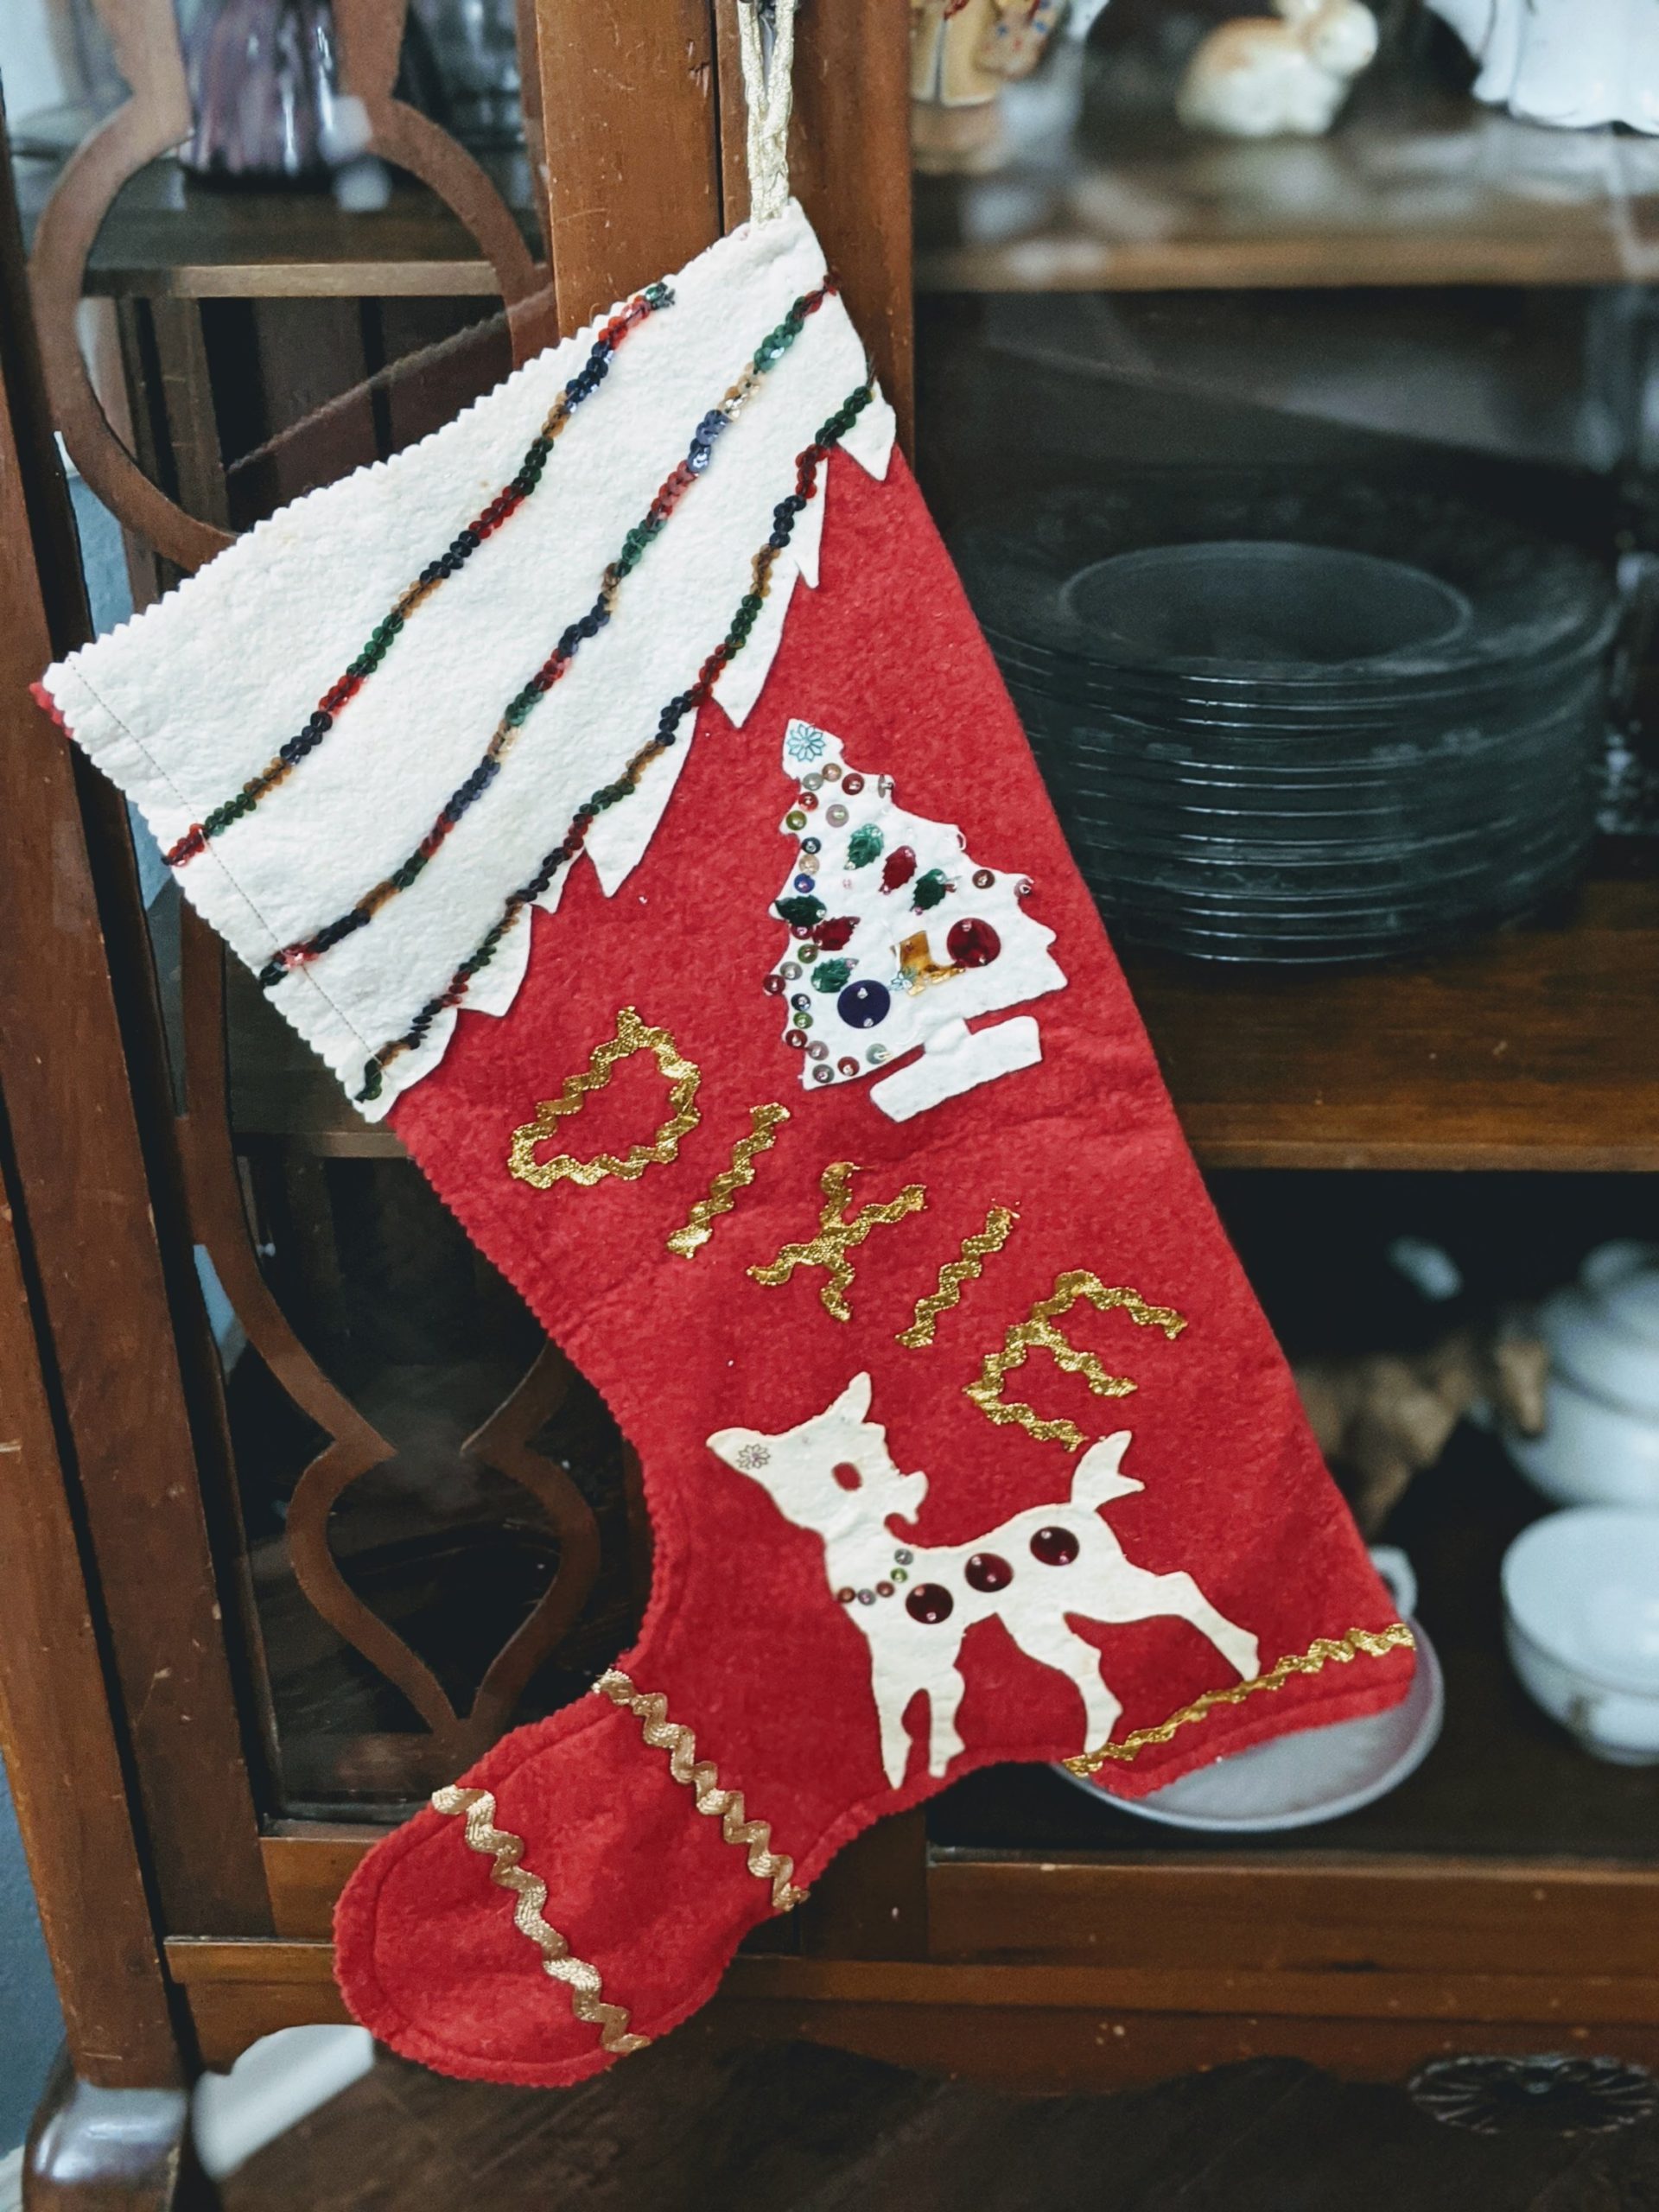 Dixie stocking remember a deceased loved one at Christmas